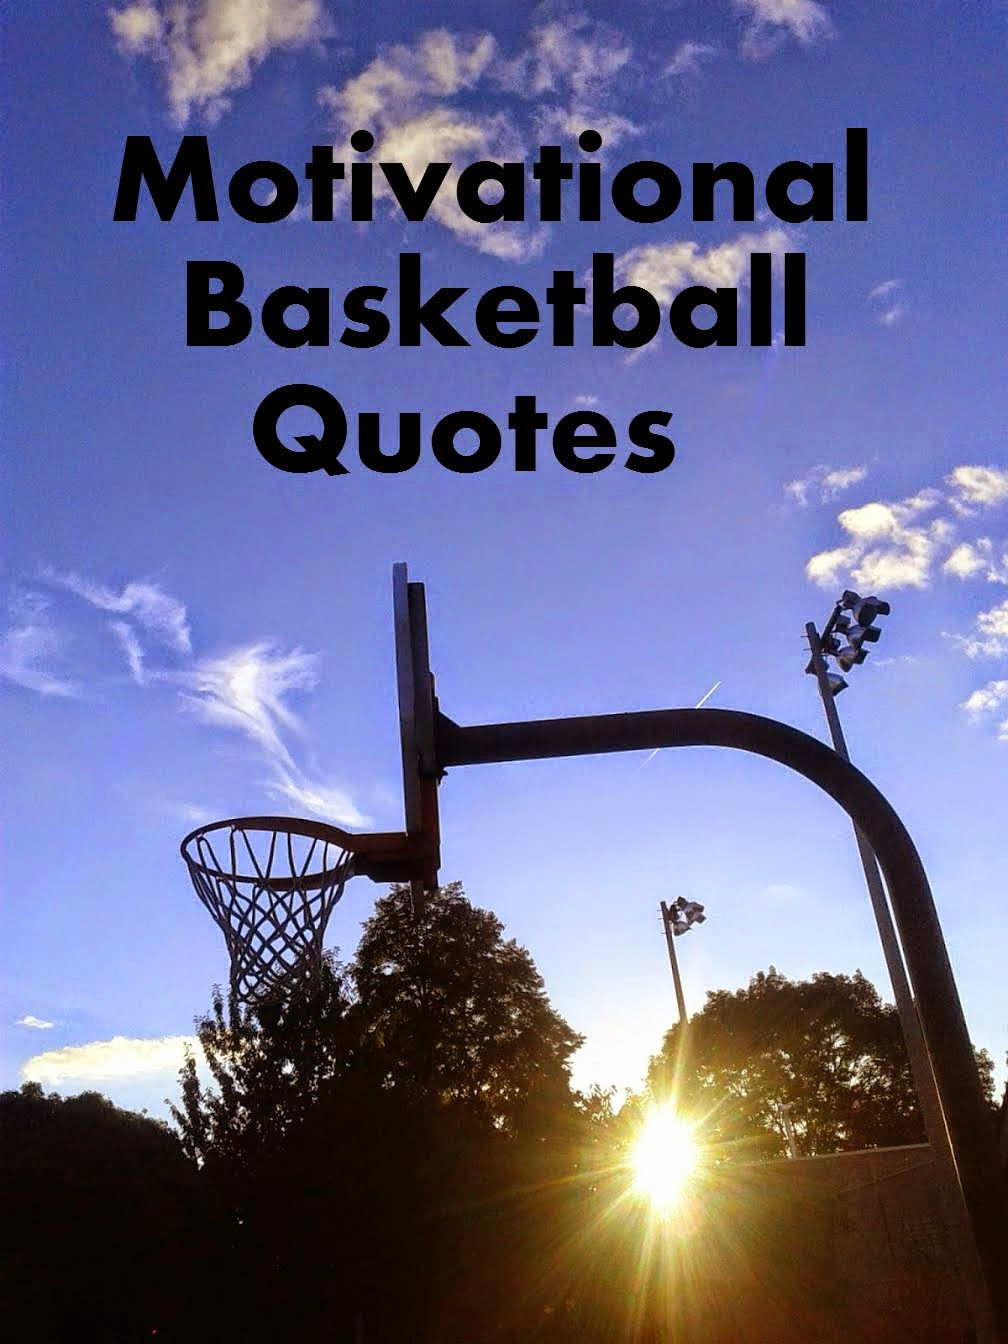 Motivational Quote Images
 Motivational Basketball Quotes For Dreams QuotesGram